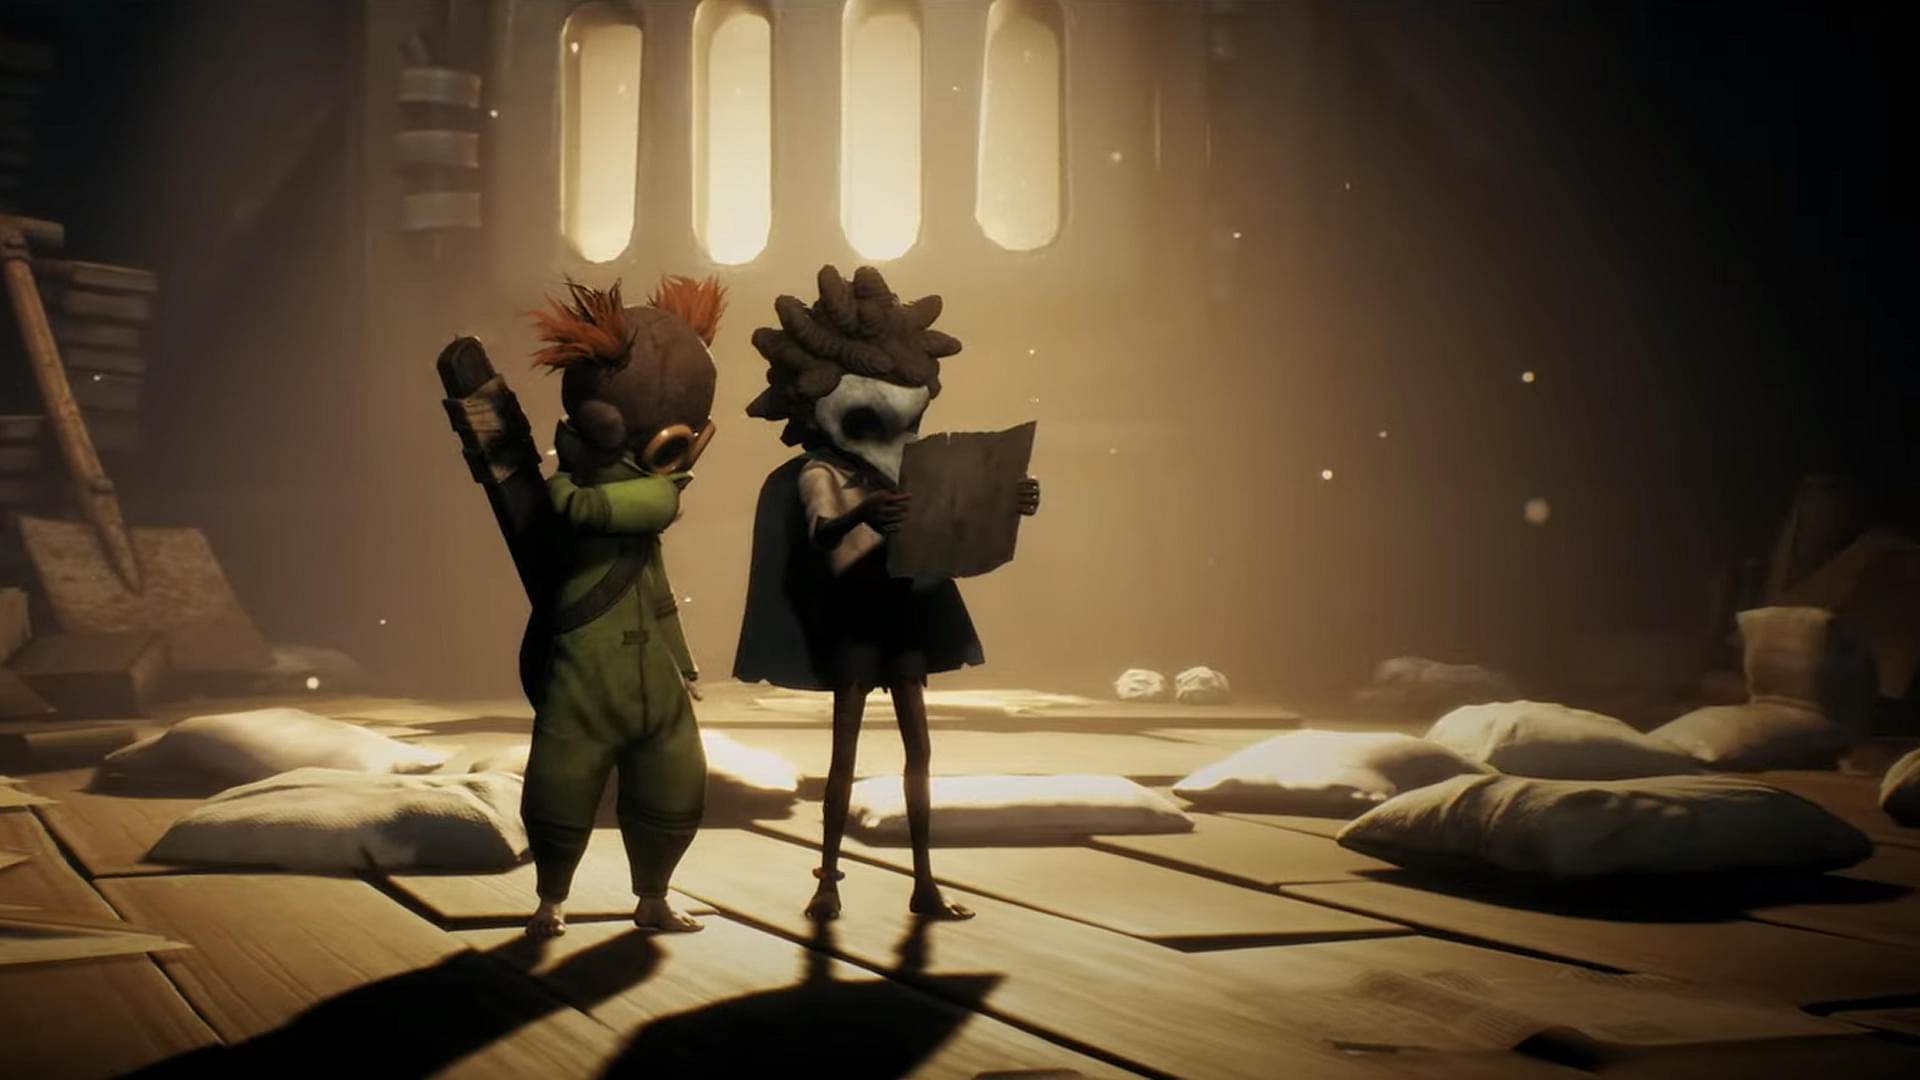 An image showing two new characters in Little Nightmares 3